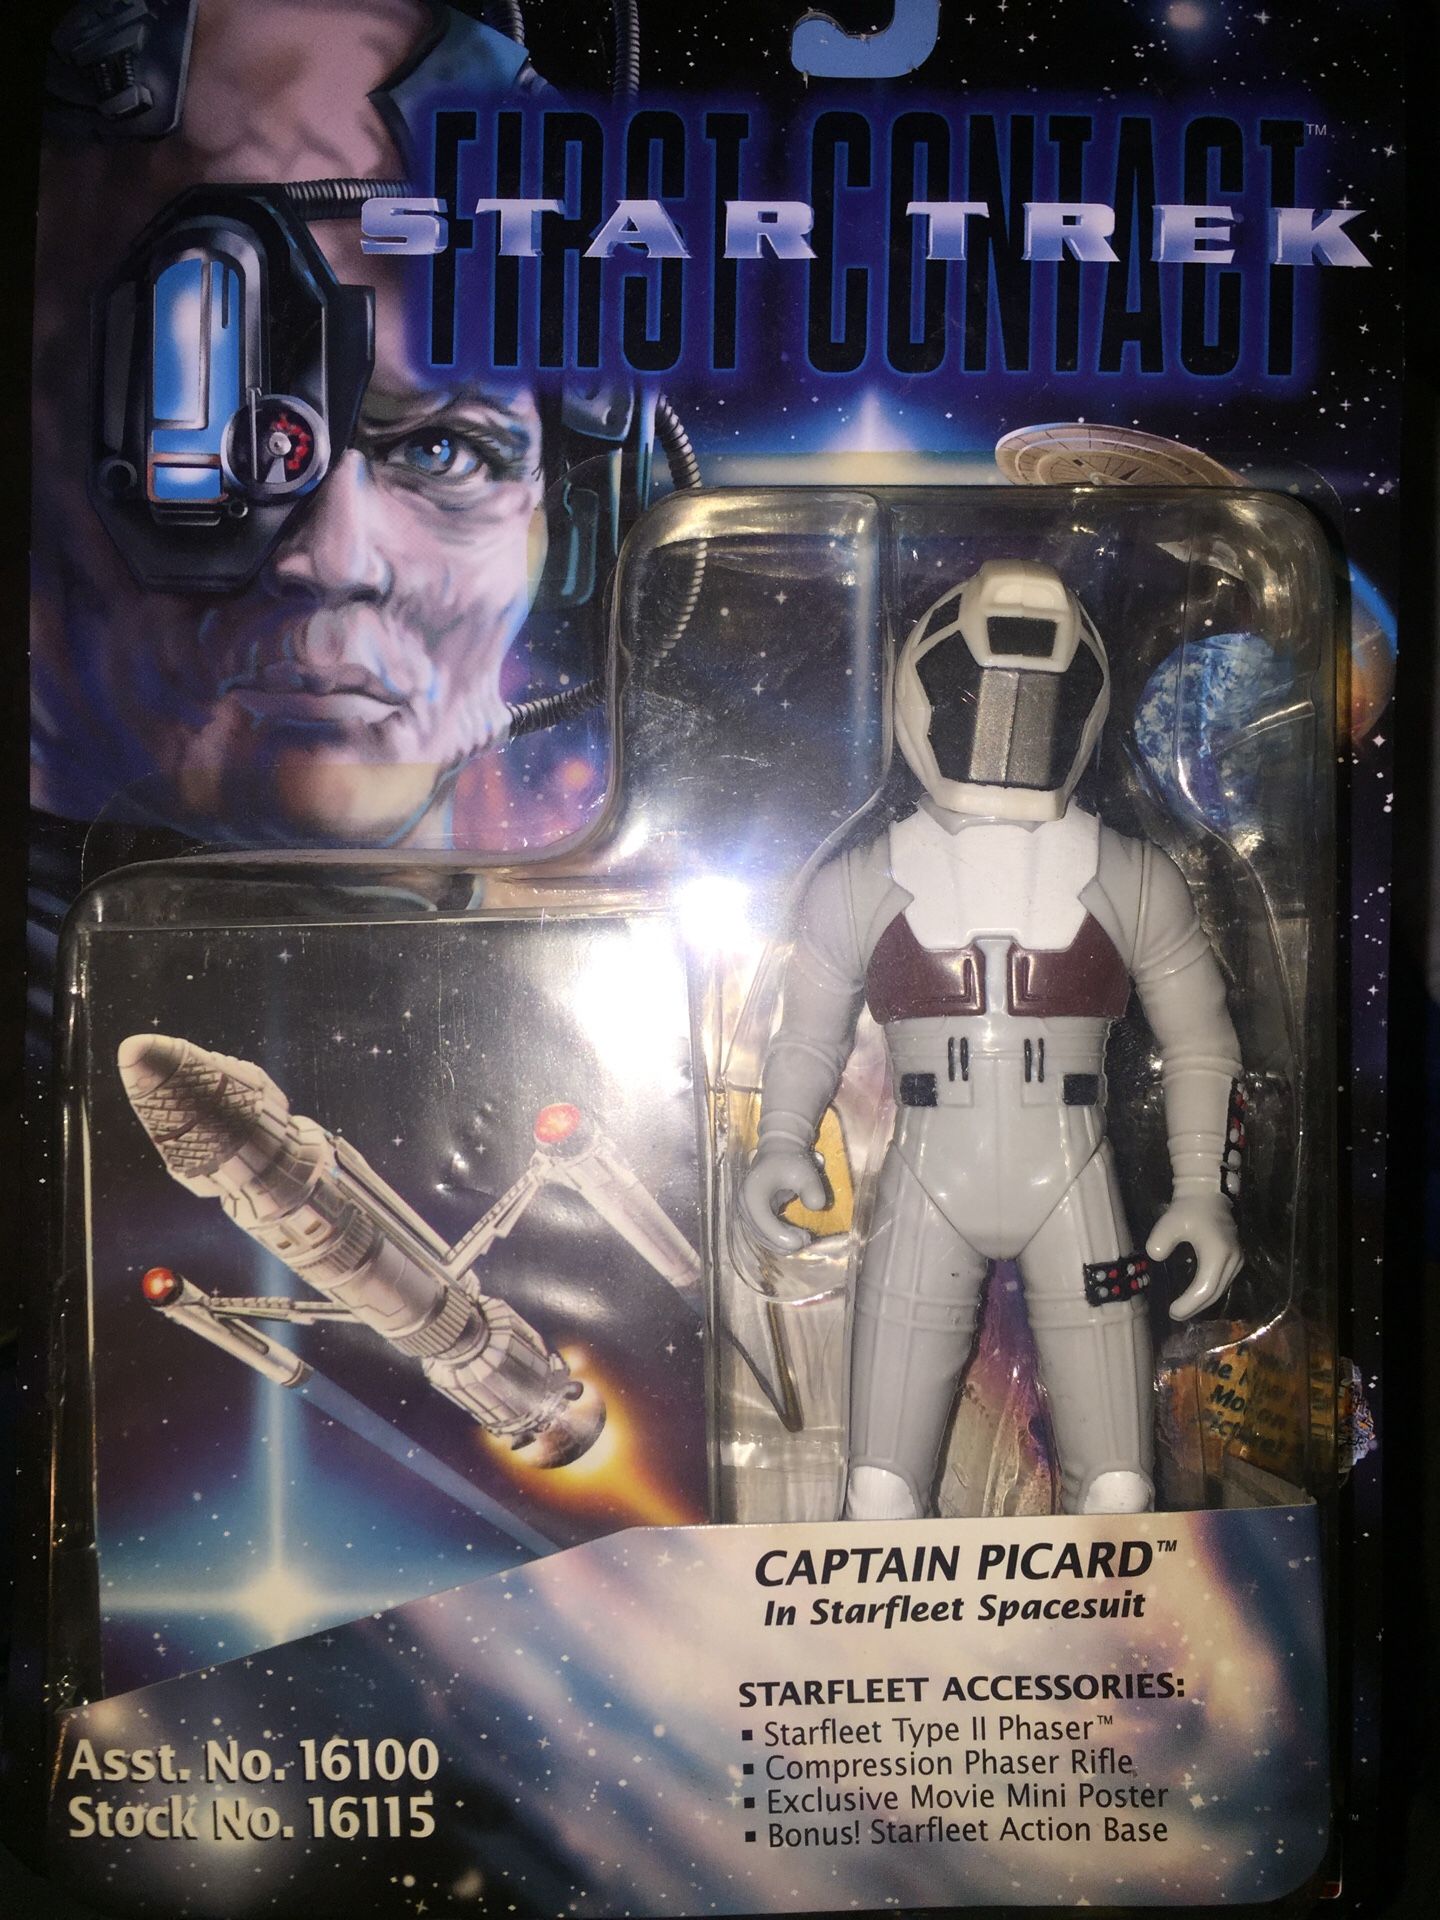 Captain Picard Star Trek First Contact action figure